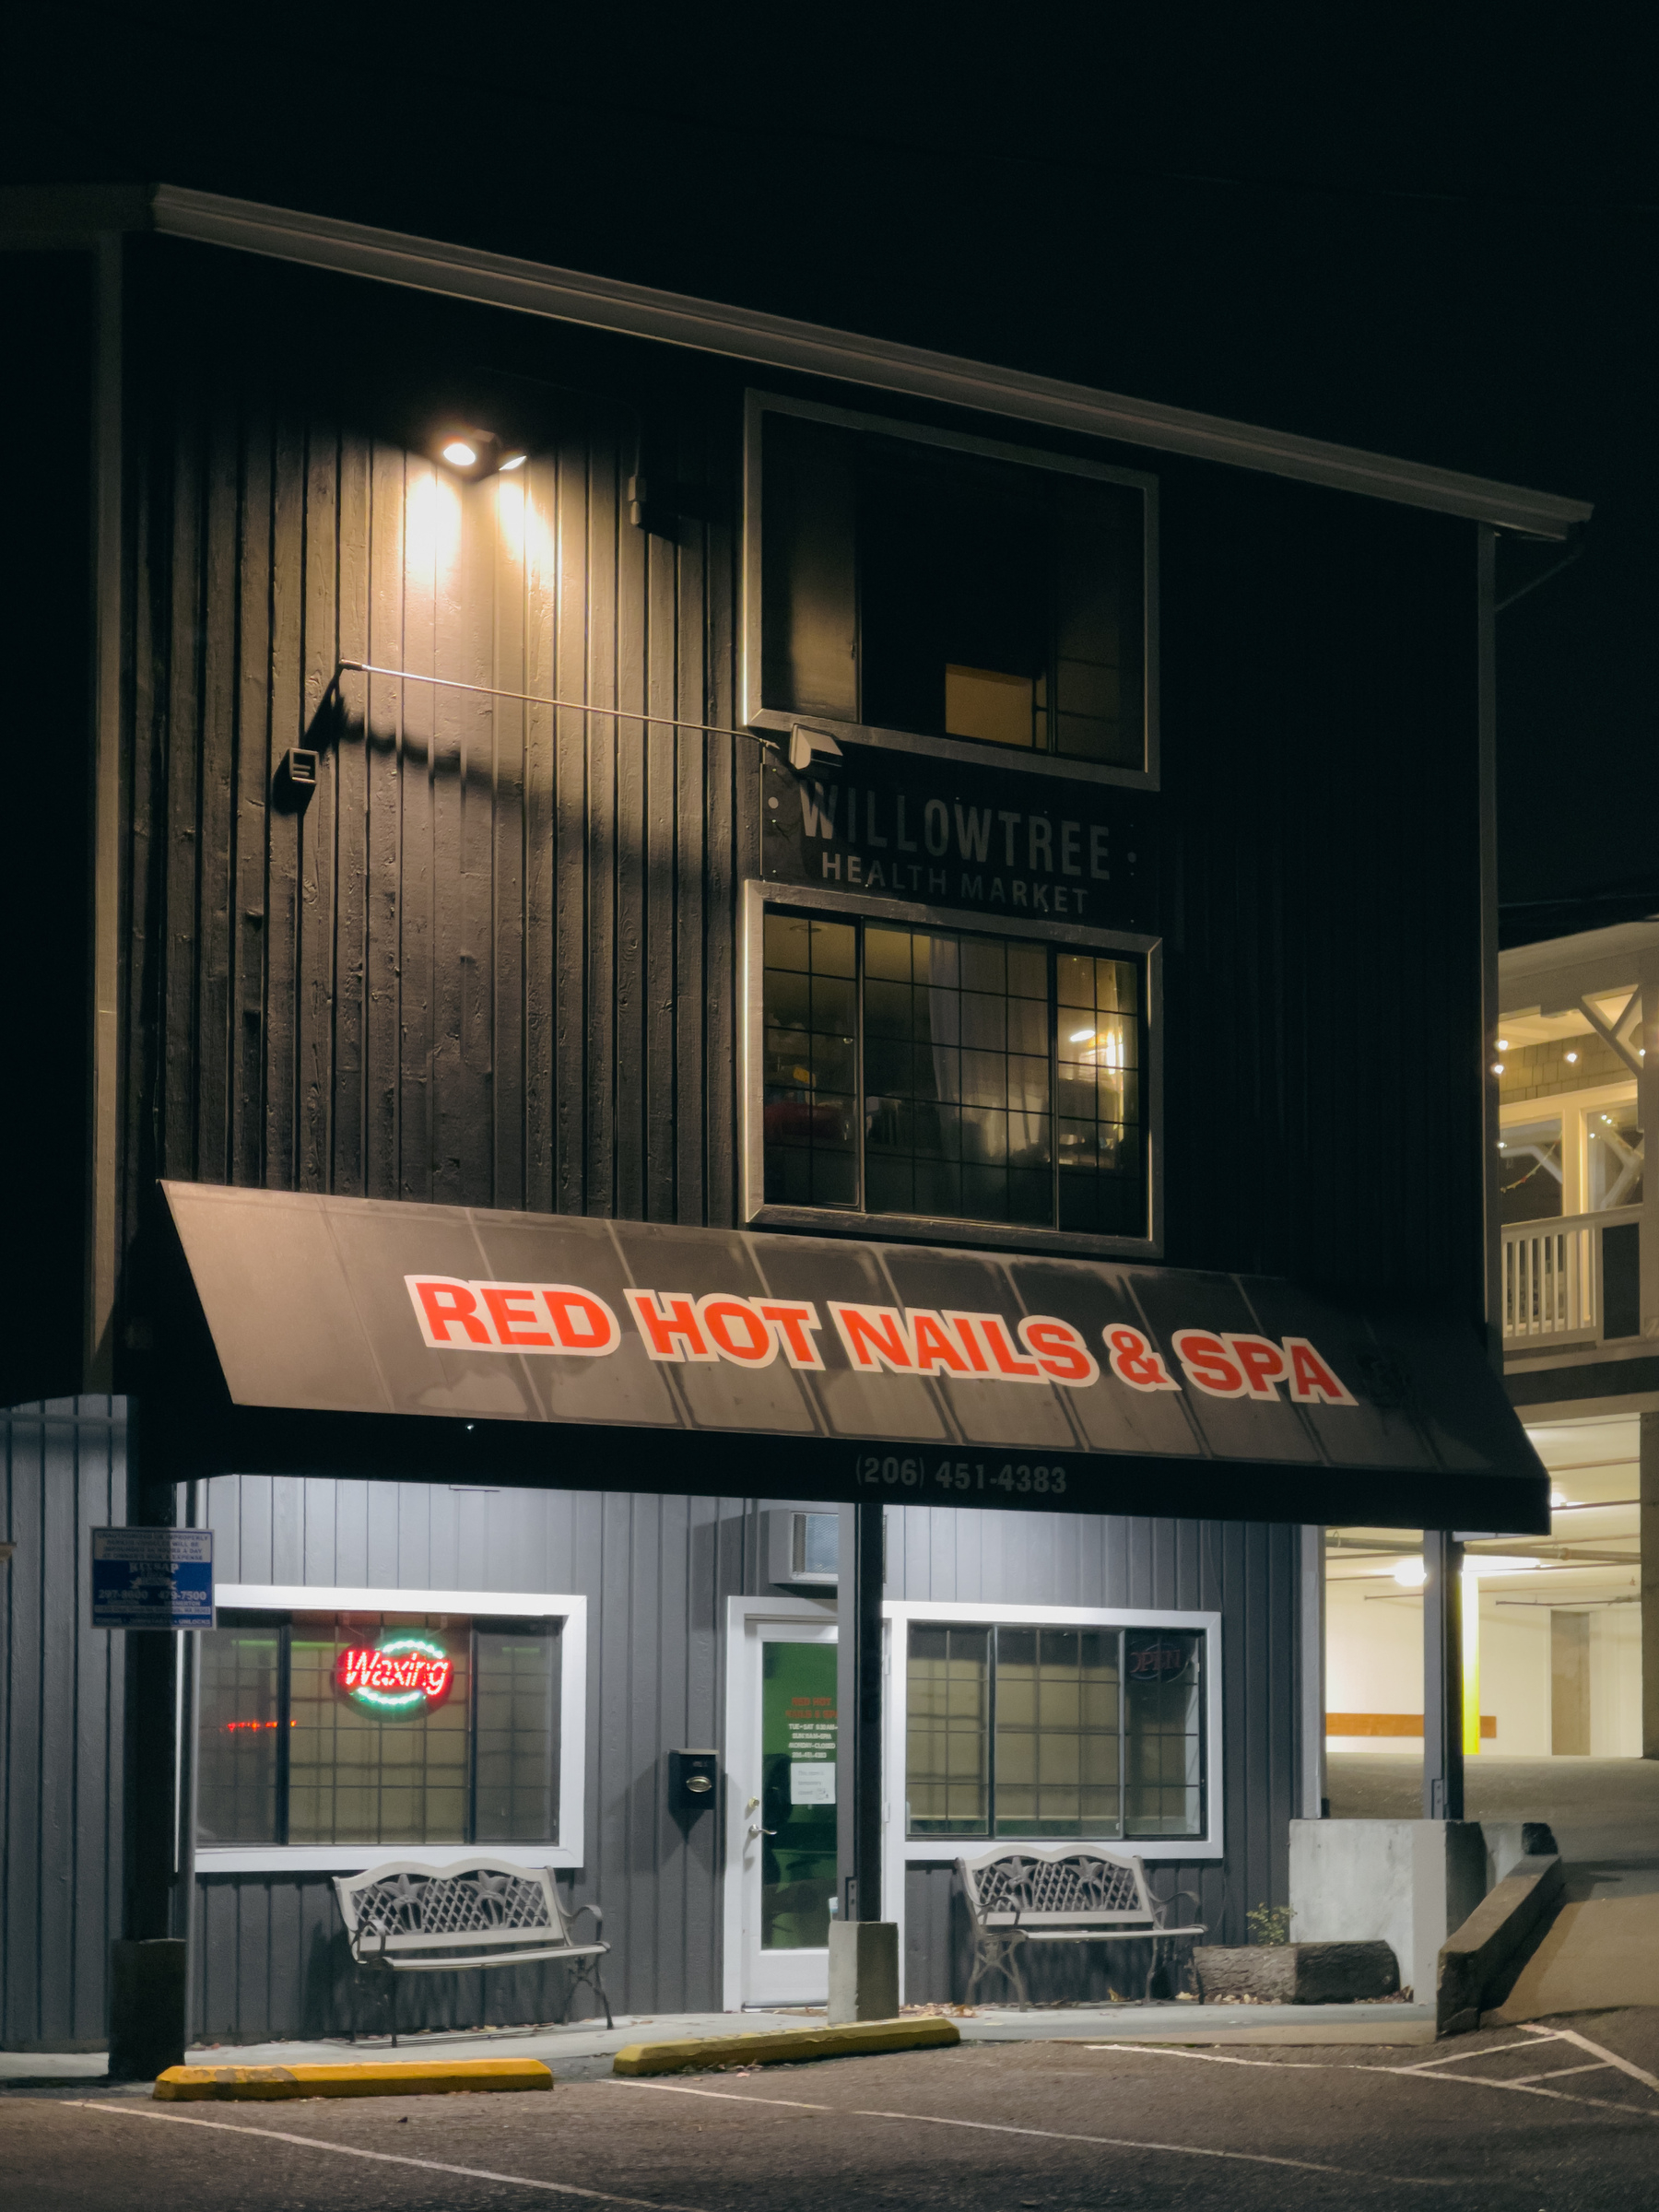 Three story commercial building with Red Hot Nails Salon on the ground floor at night.